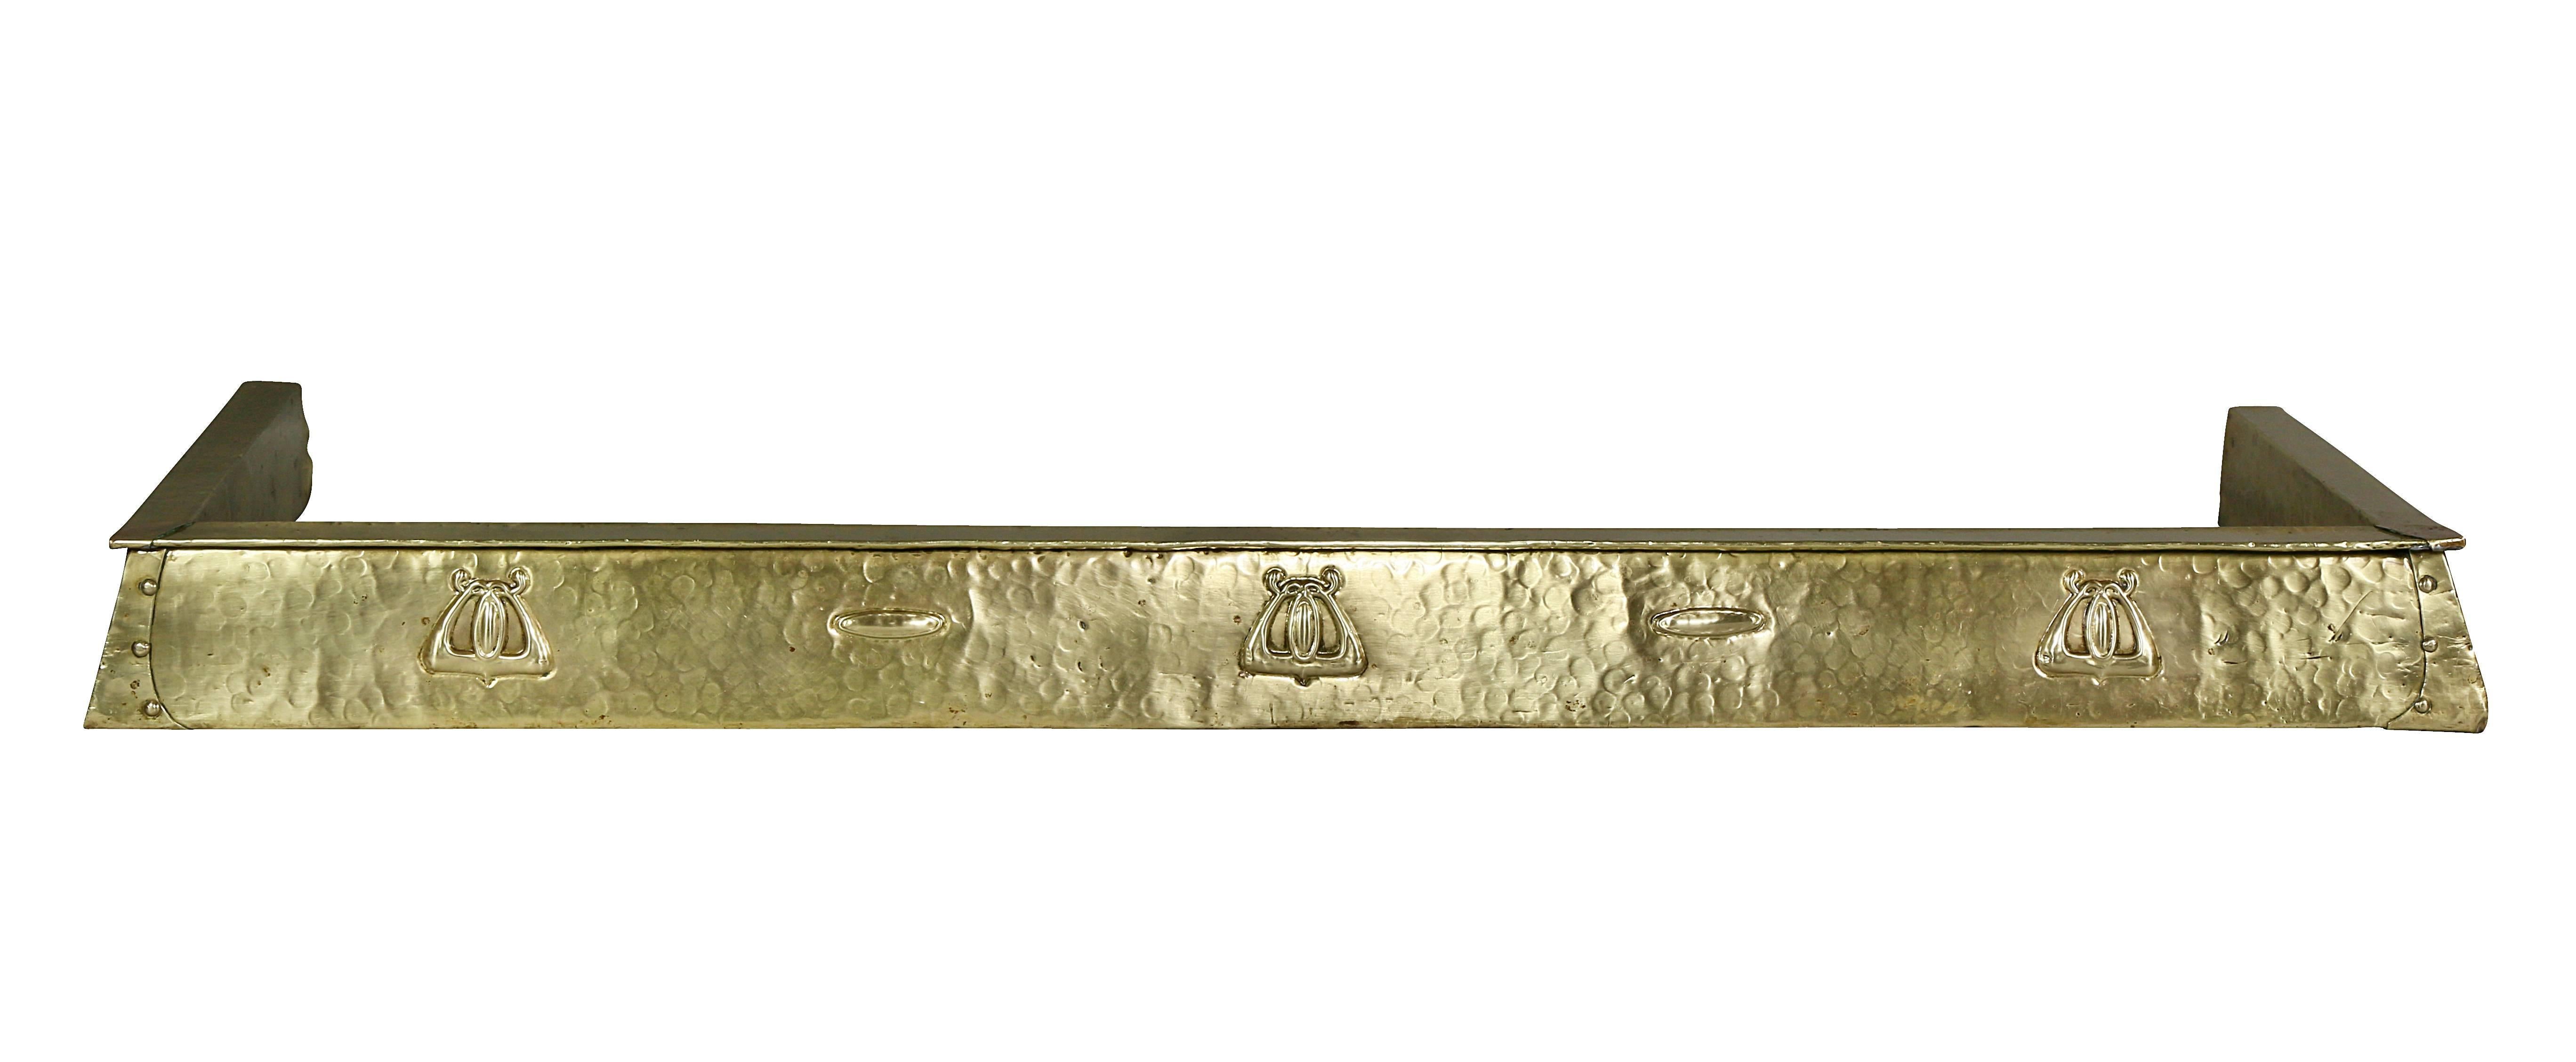 With hammered surface and alternating motifs.